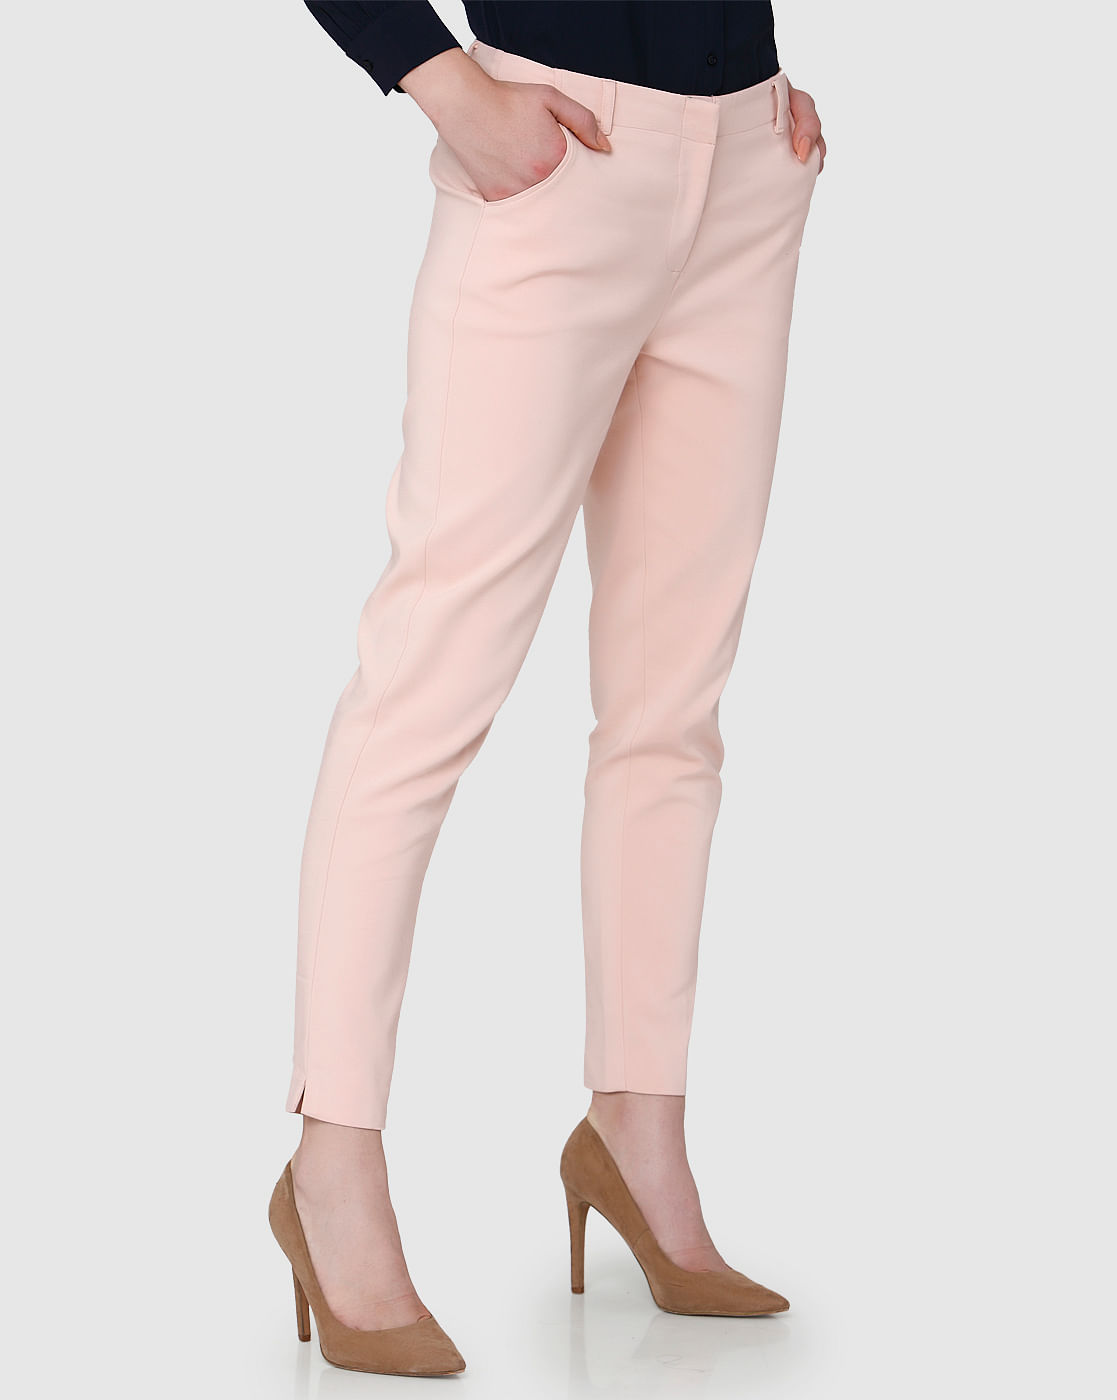 Bubble Gum Pink Pull-On Stretch Ankle Pant - Large | Golf outfit, Golf  outfits women, Ankle pants